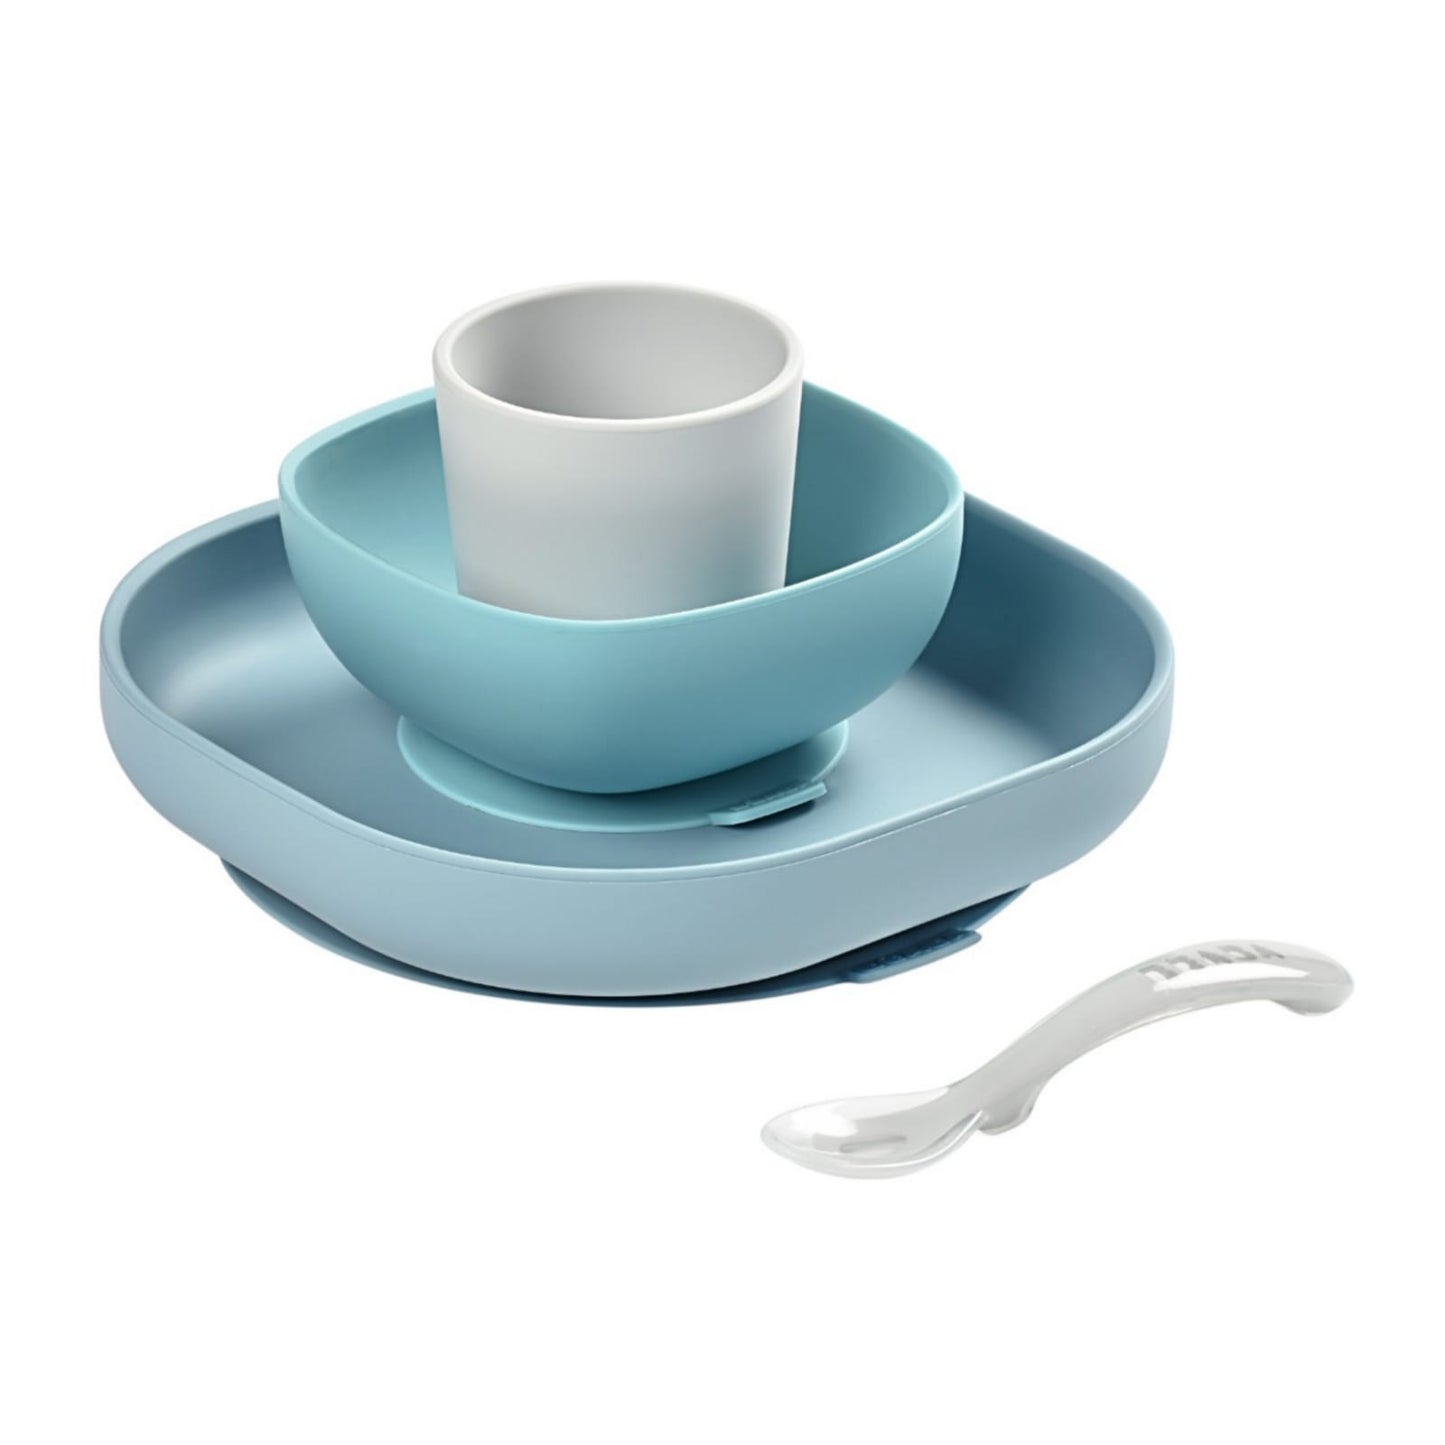 Silicone Meal Set of 4- Colour: Blue, Jungle & Pink